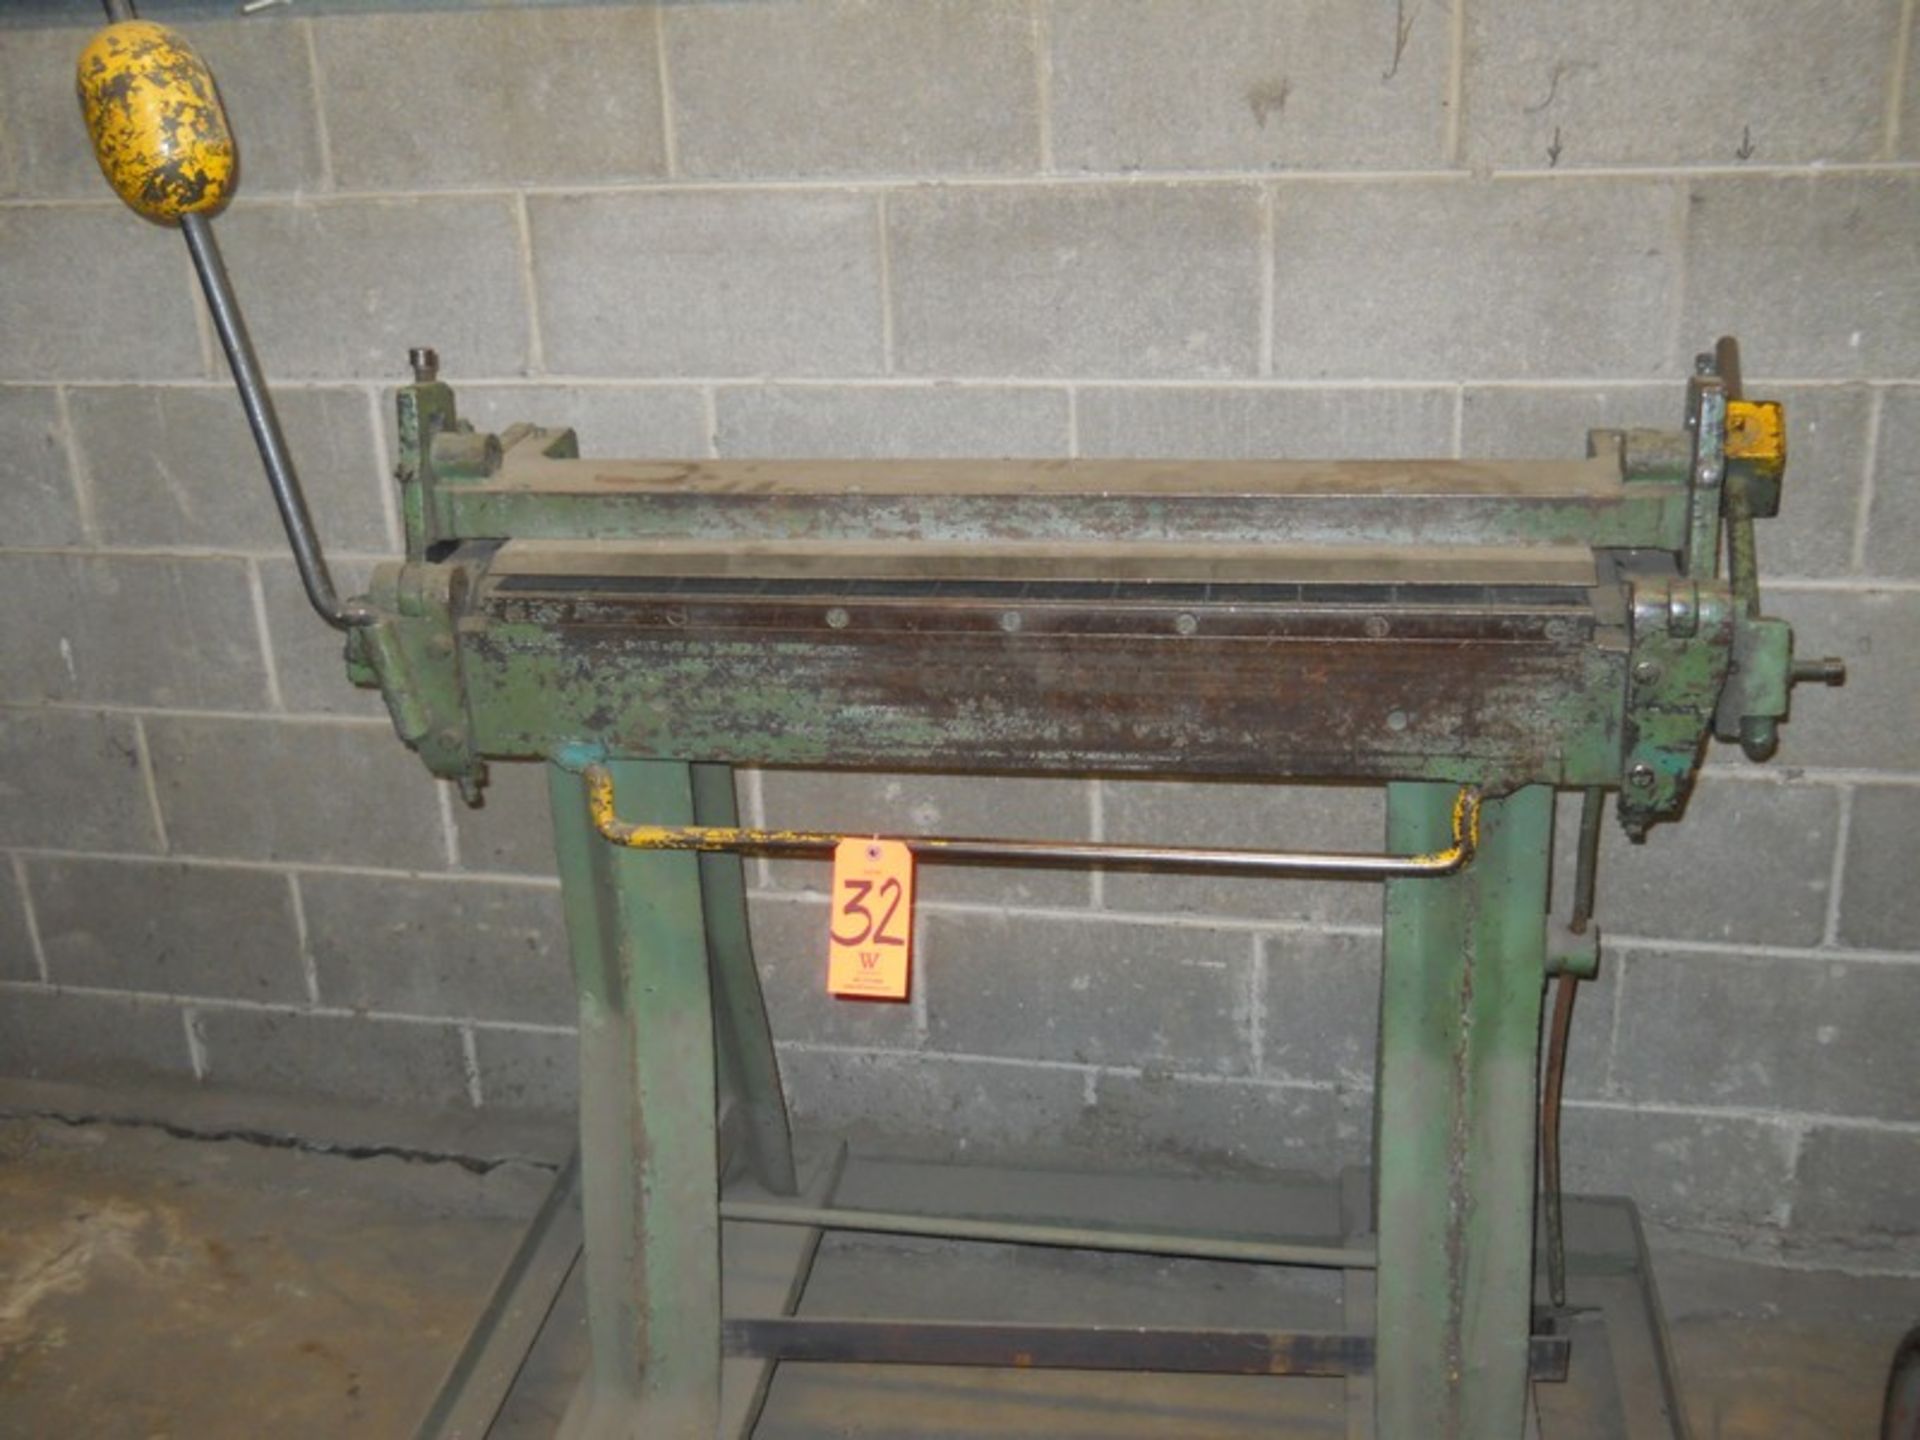 36 in. Apron / Flange Bender; on Portable Stand - Image 4 of 6